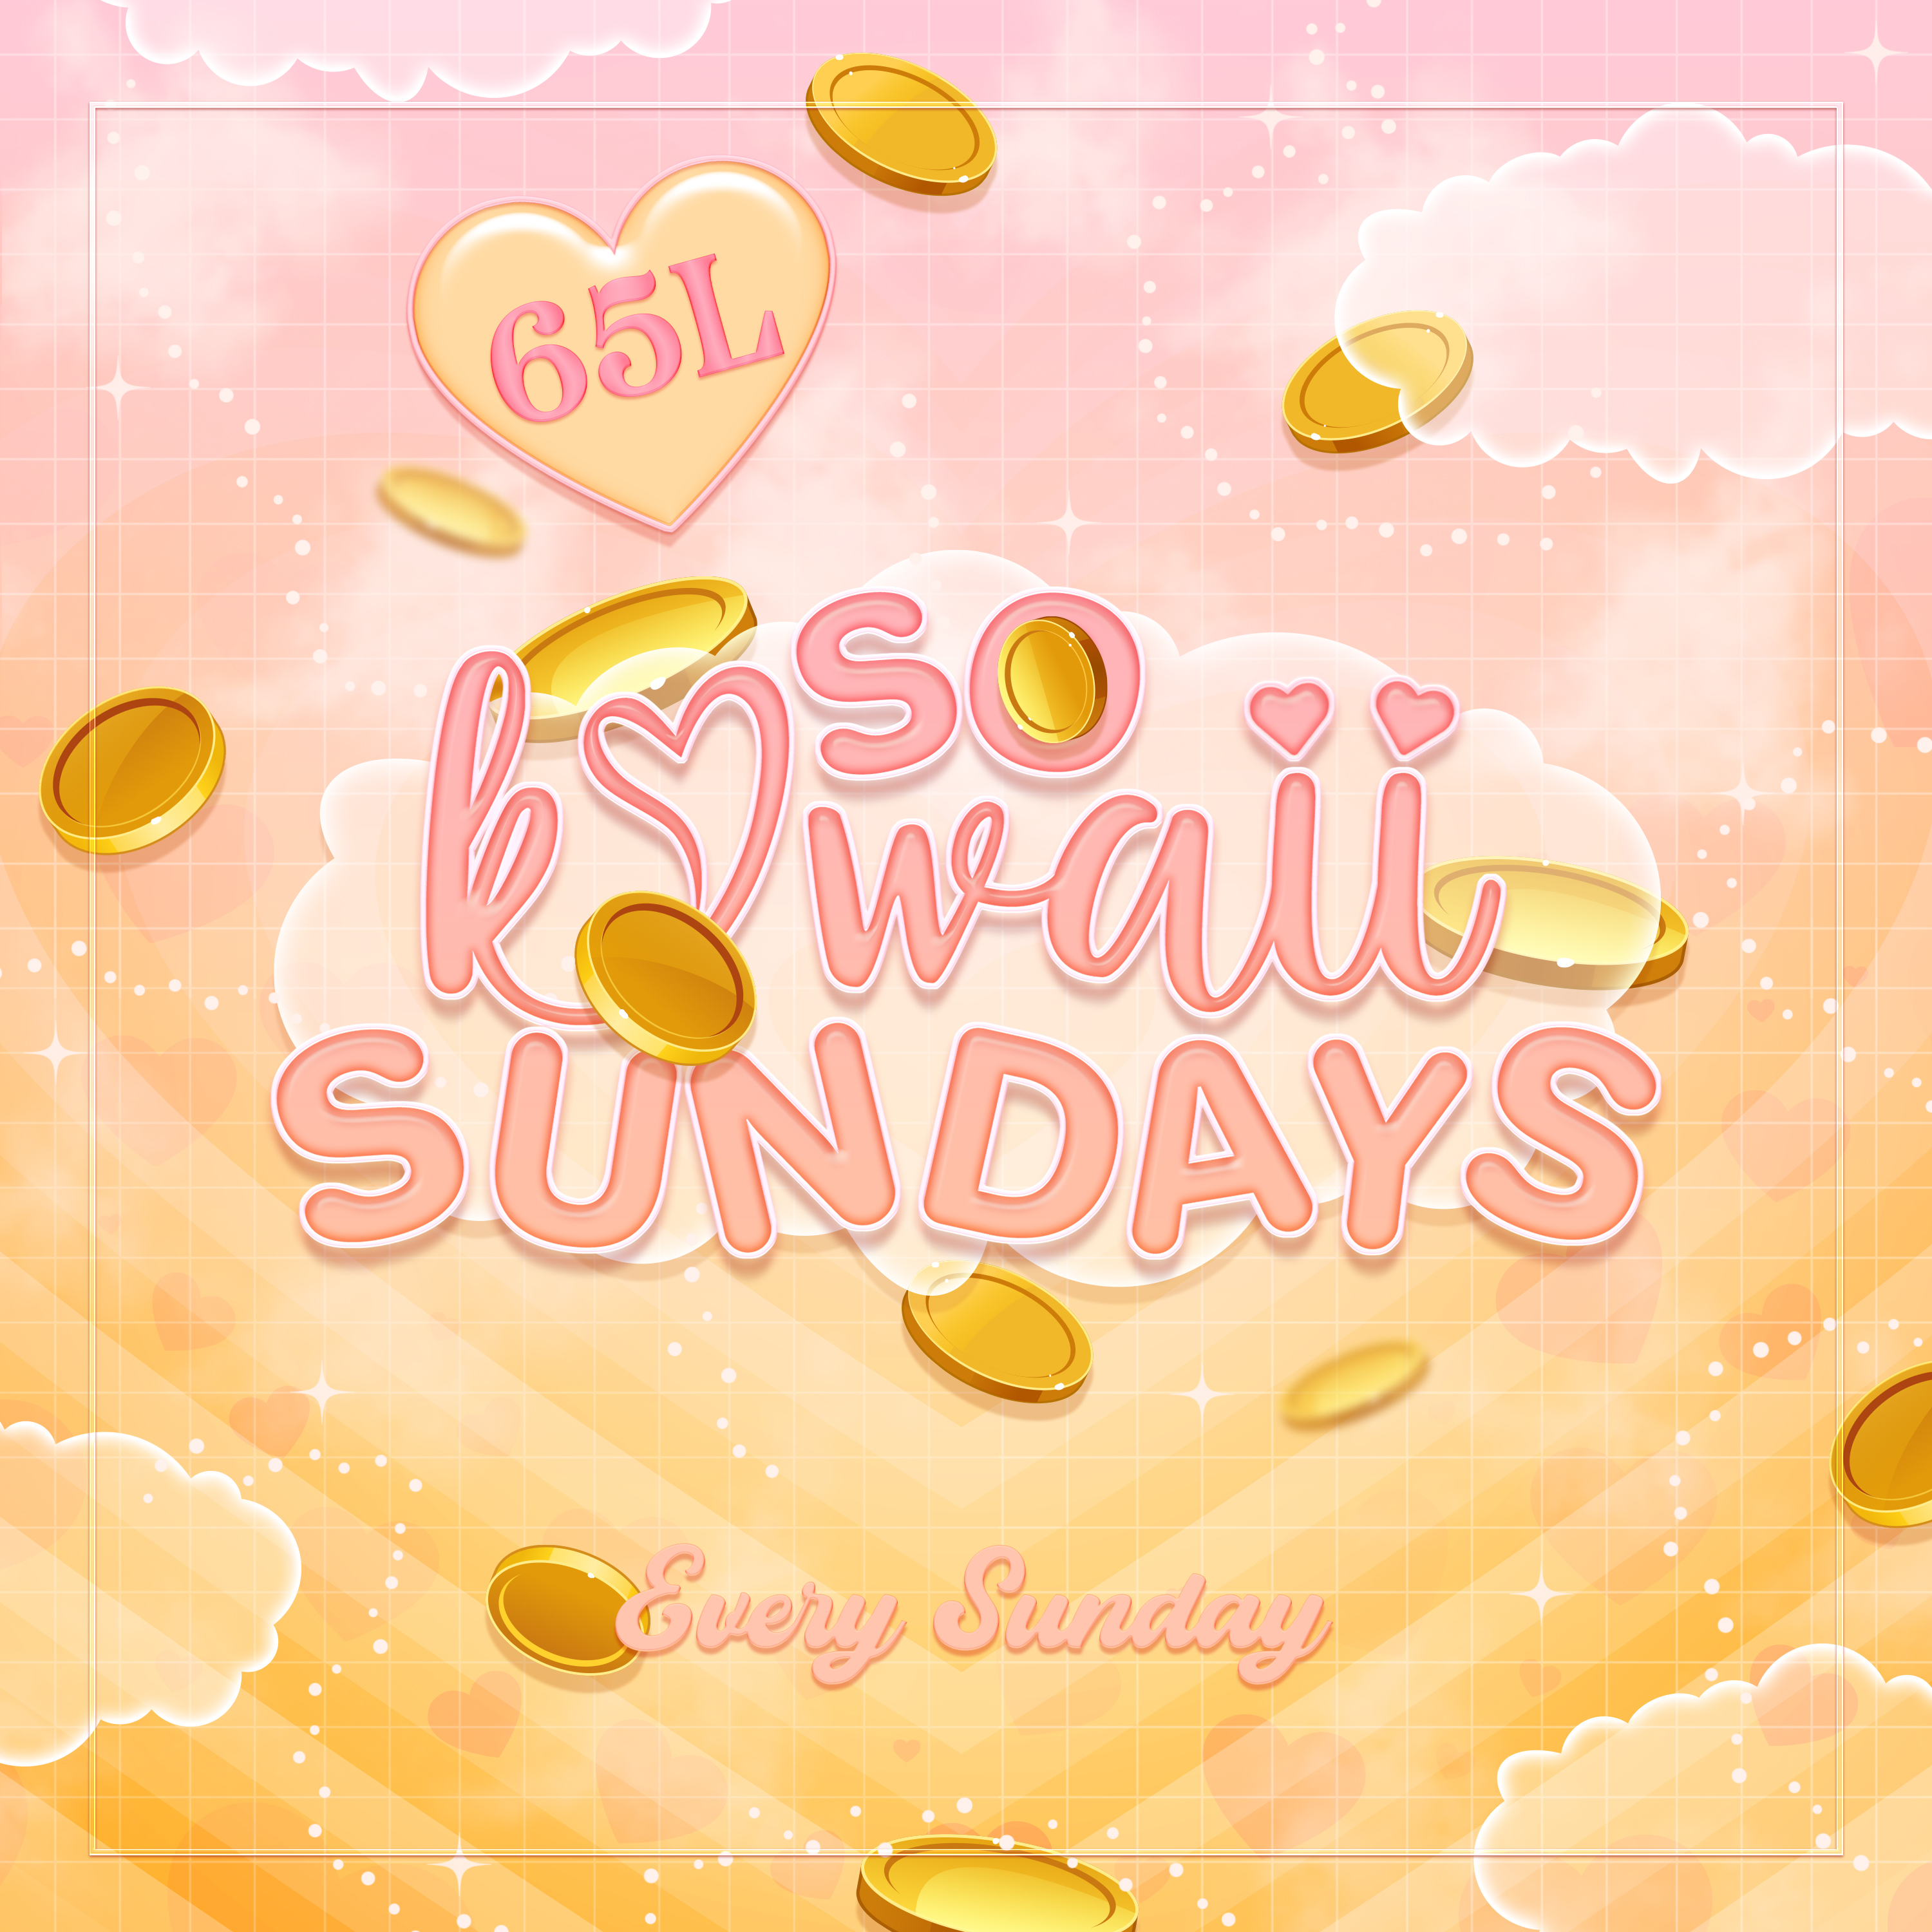 GIRLIES AND GOOD BOYS ARE IN STYLE AT SO KAWAII SUNDAY!